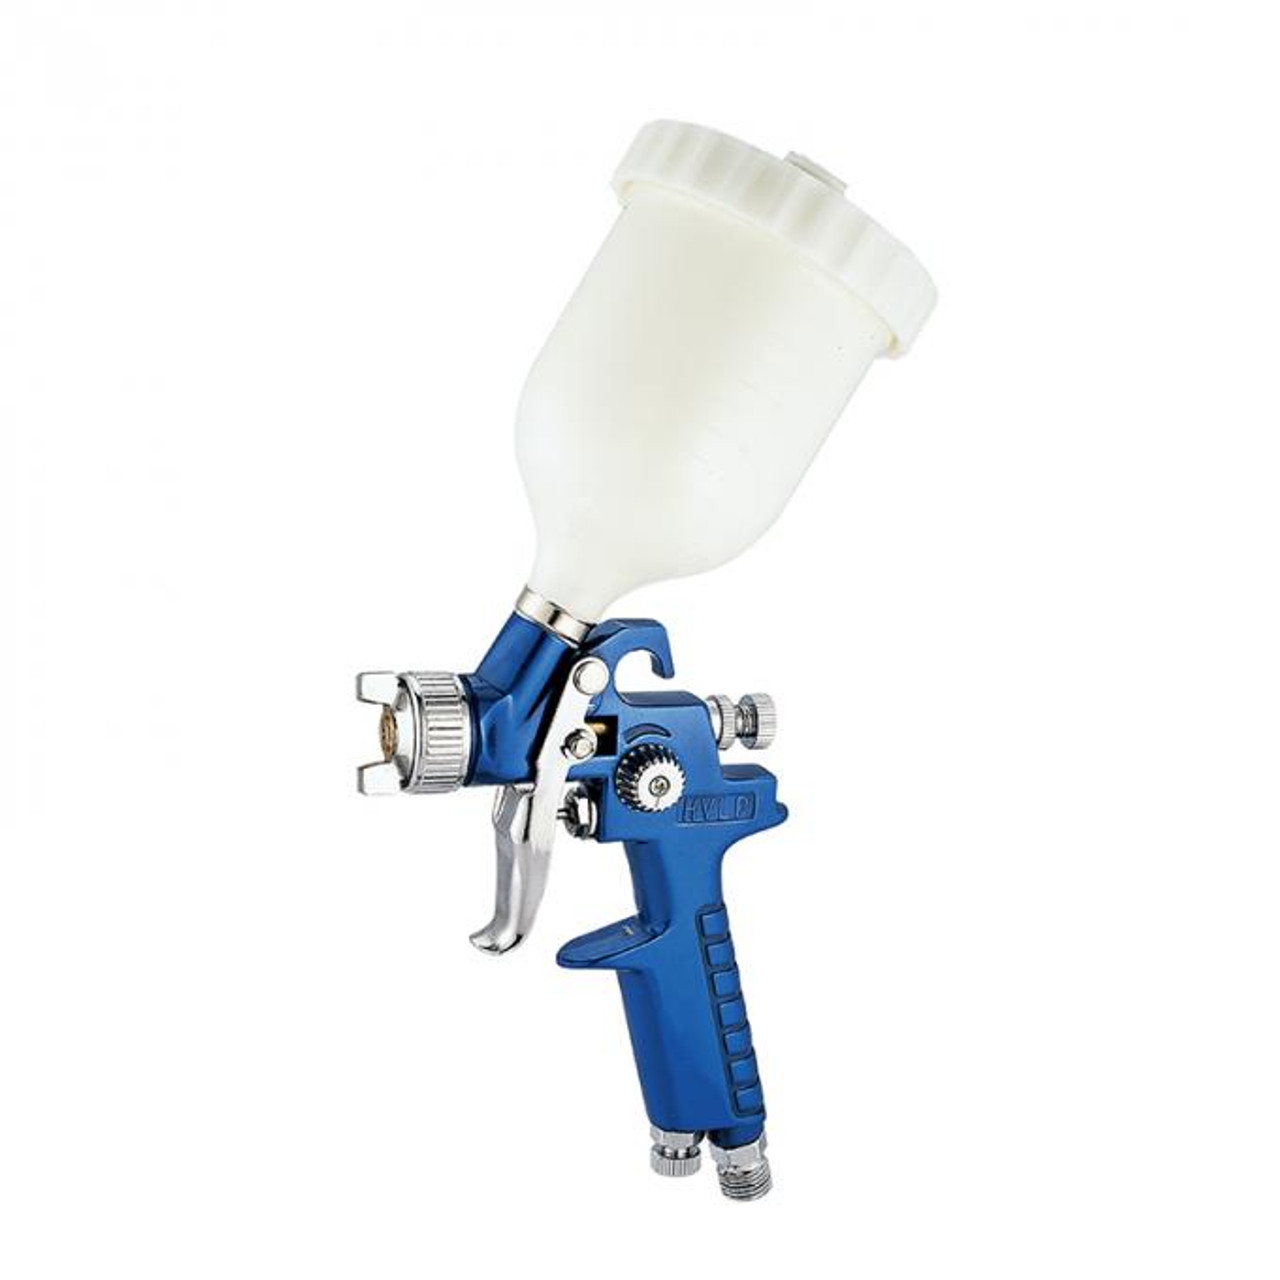 DevilBiss? SRI PRO LITE? 905082 Gravity Feed Spray Gun with Cup, 1 mm Nozzle